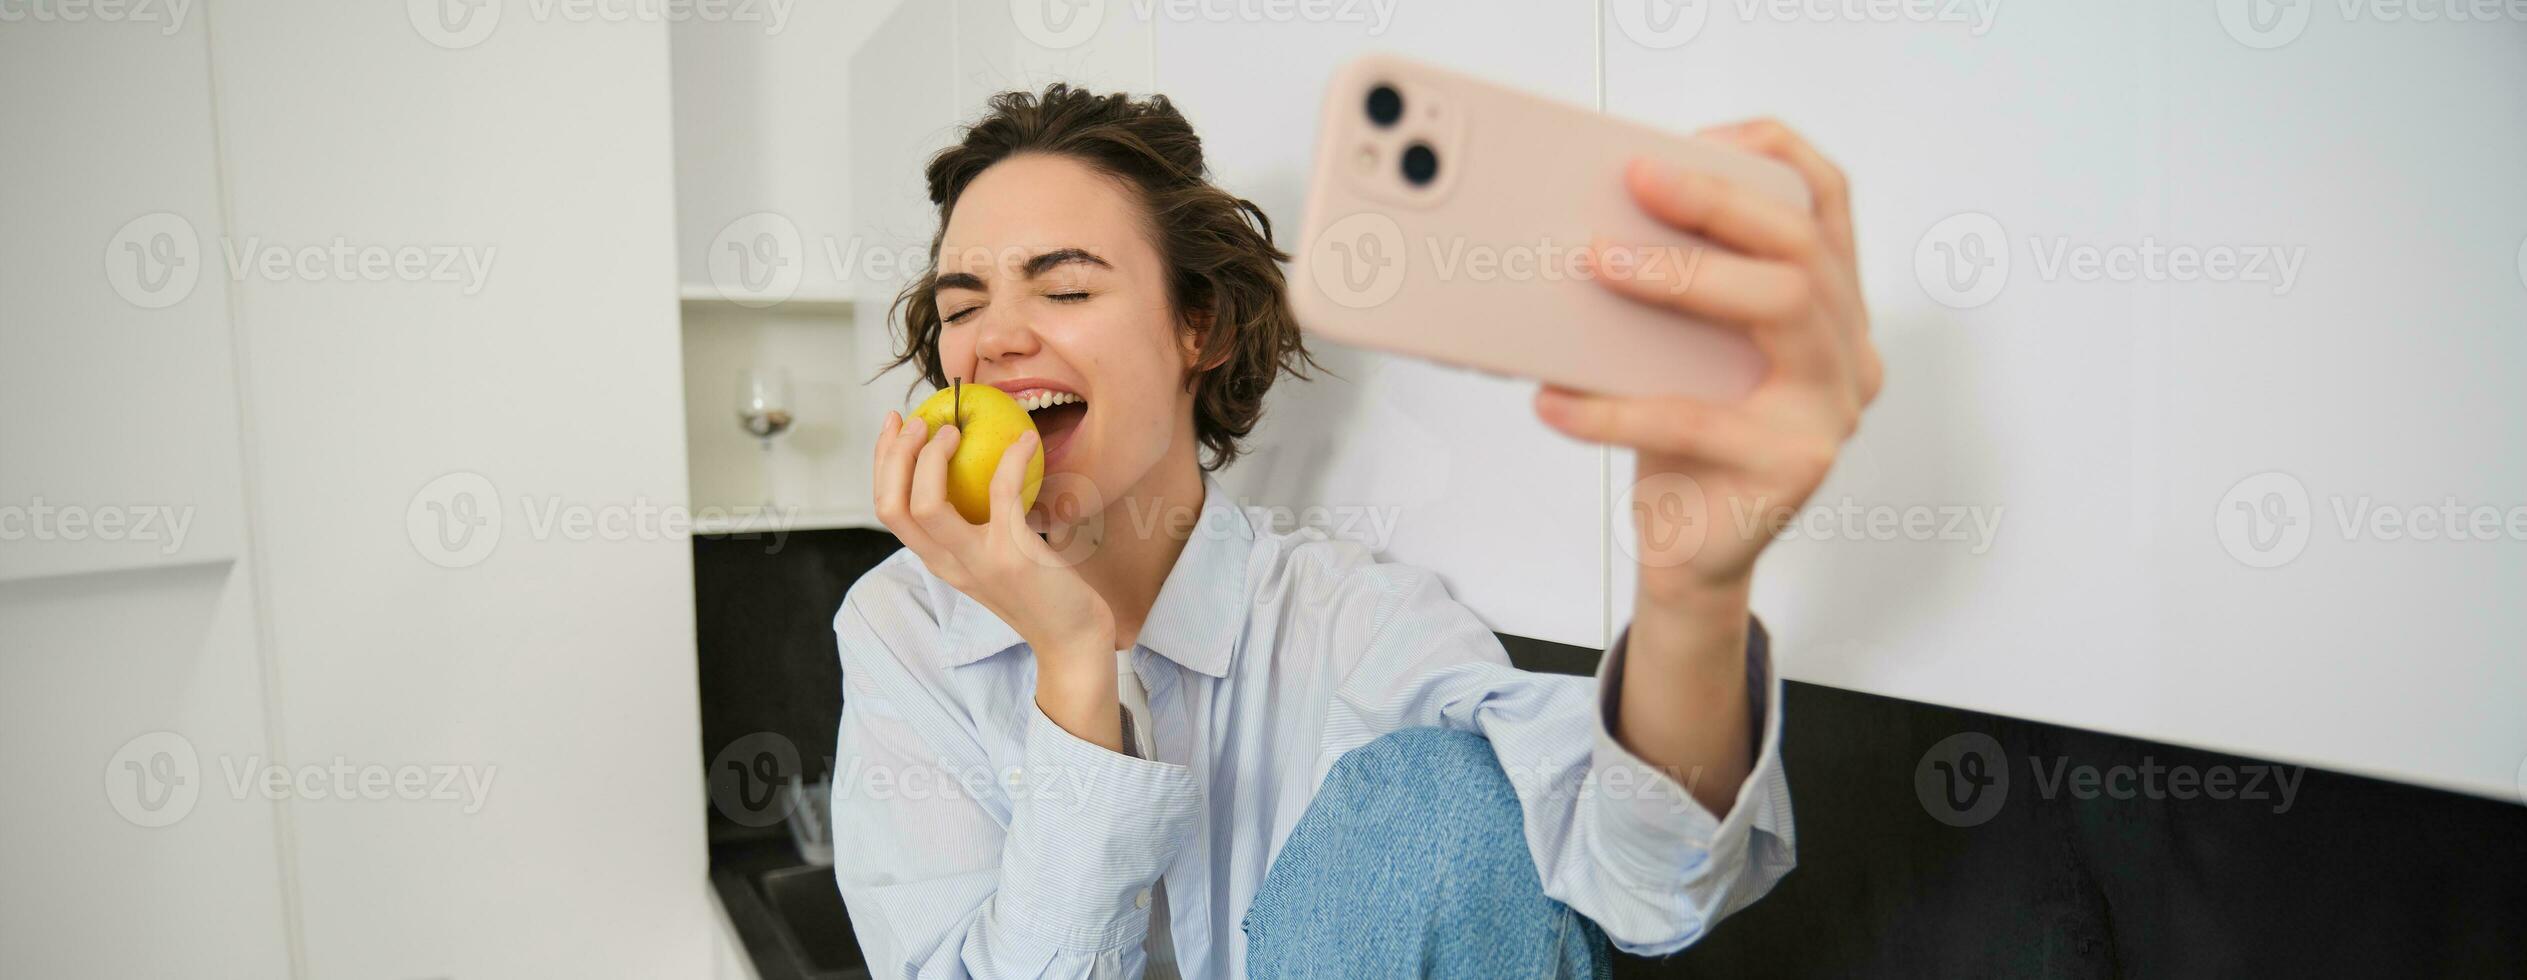 Candid, happy young woman biting an apple for a selfie, takes photo on smartphone while eating fruit